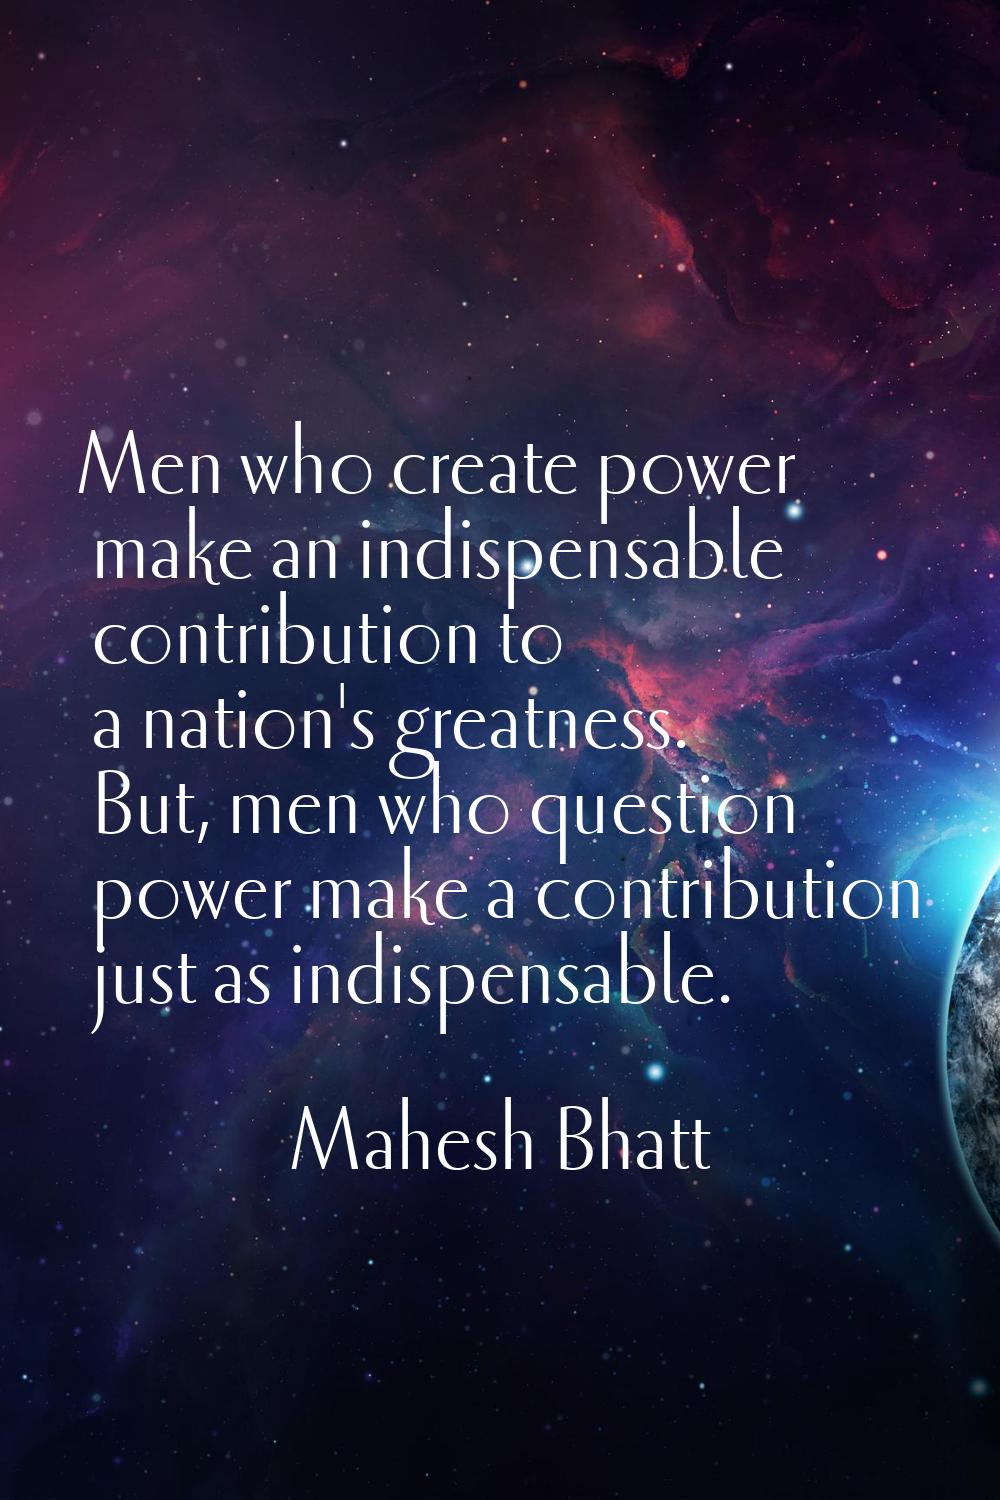 Men who create power make an indispensable contribution to a nation's greatness. But, men who quest